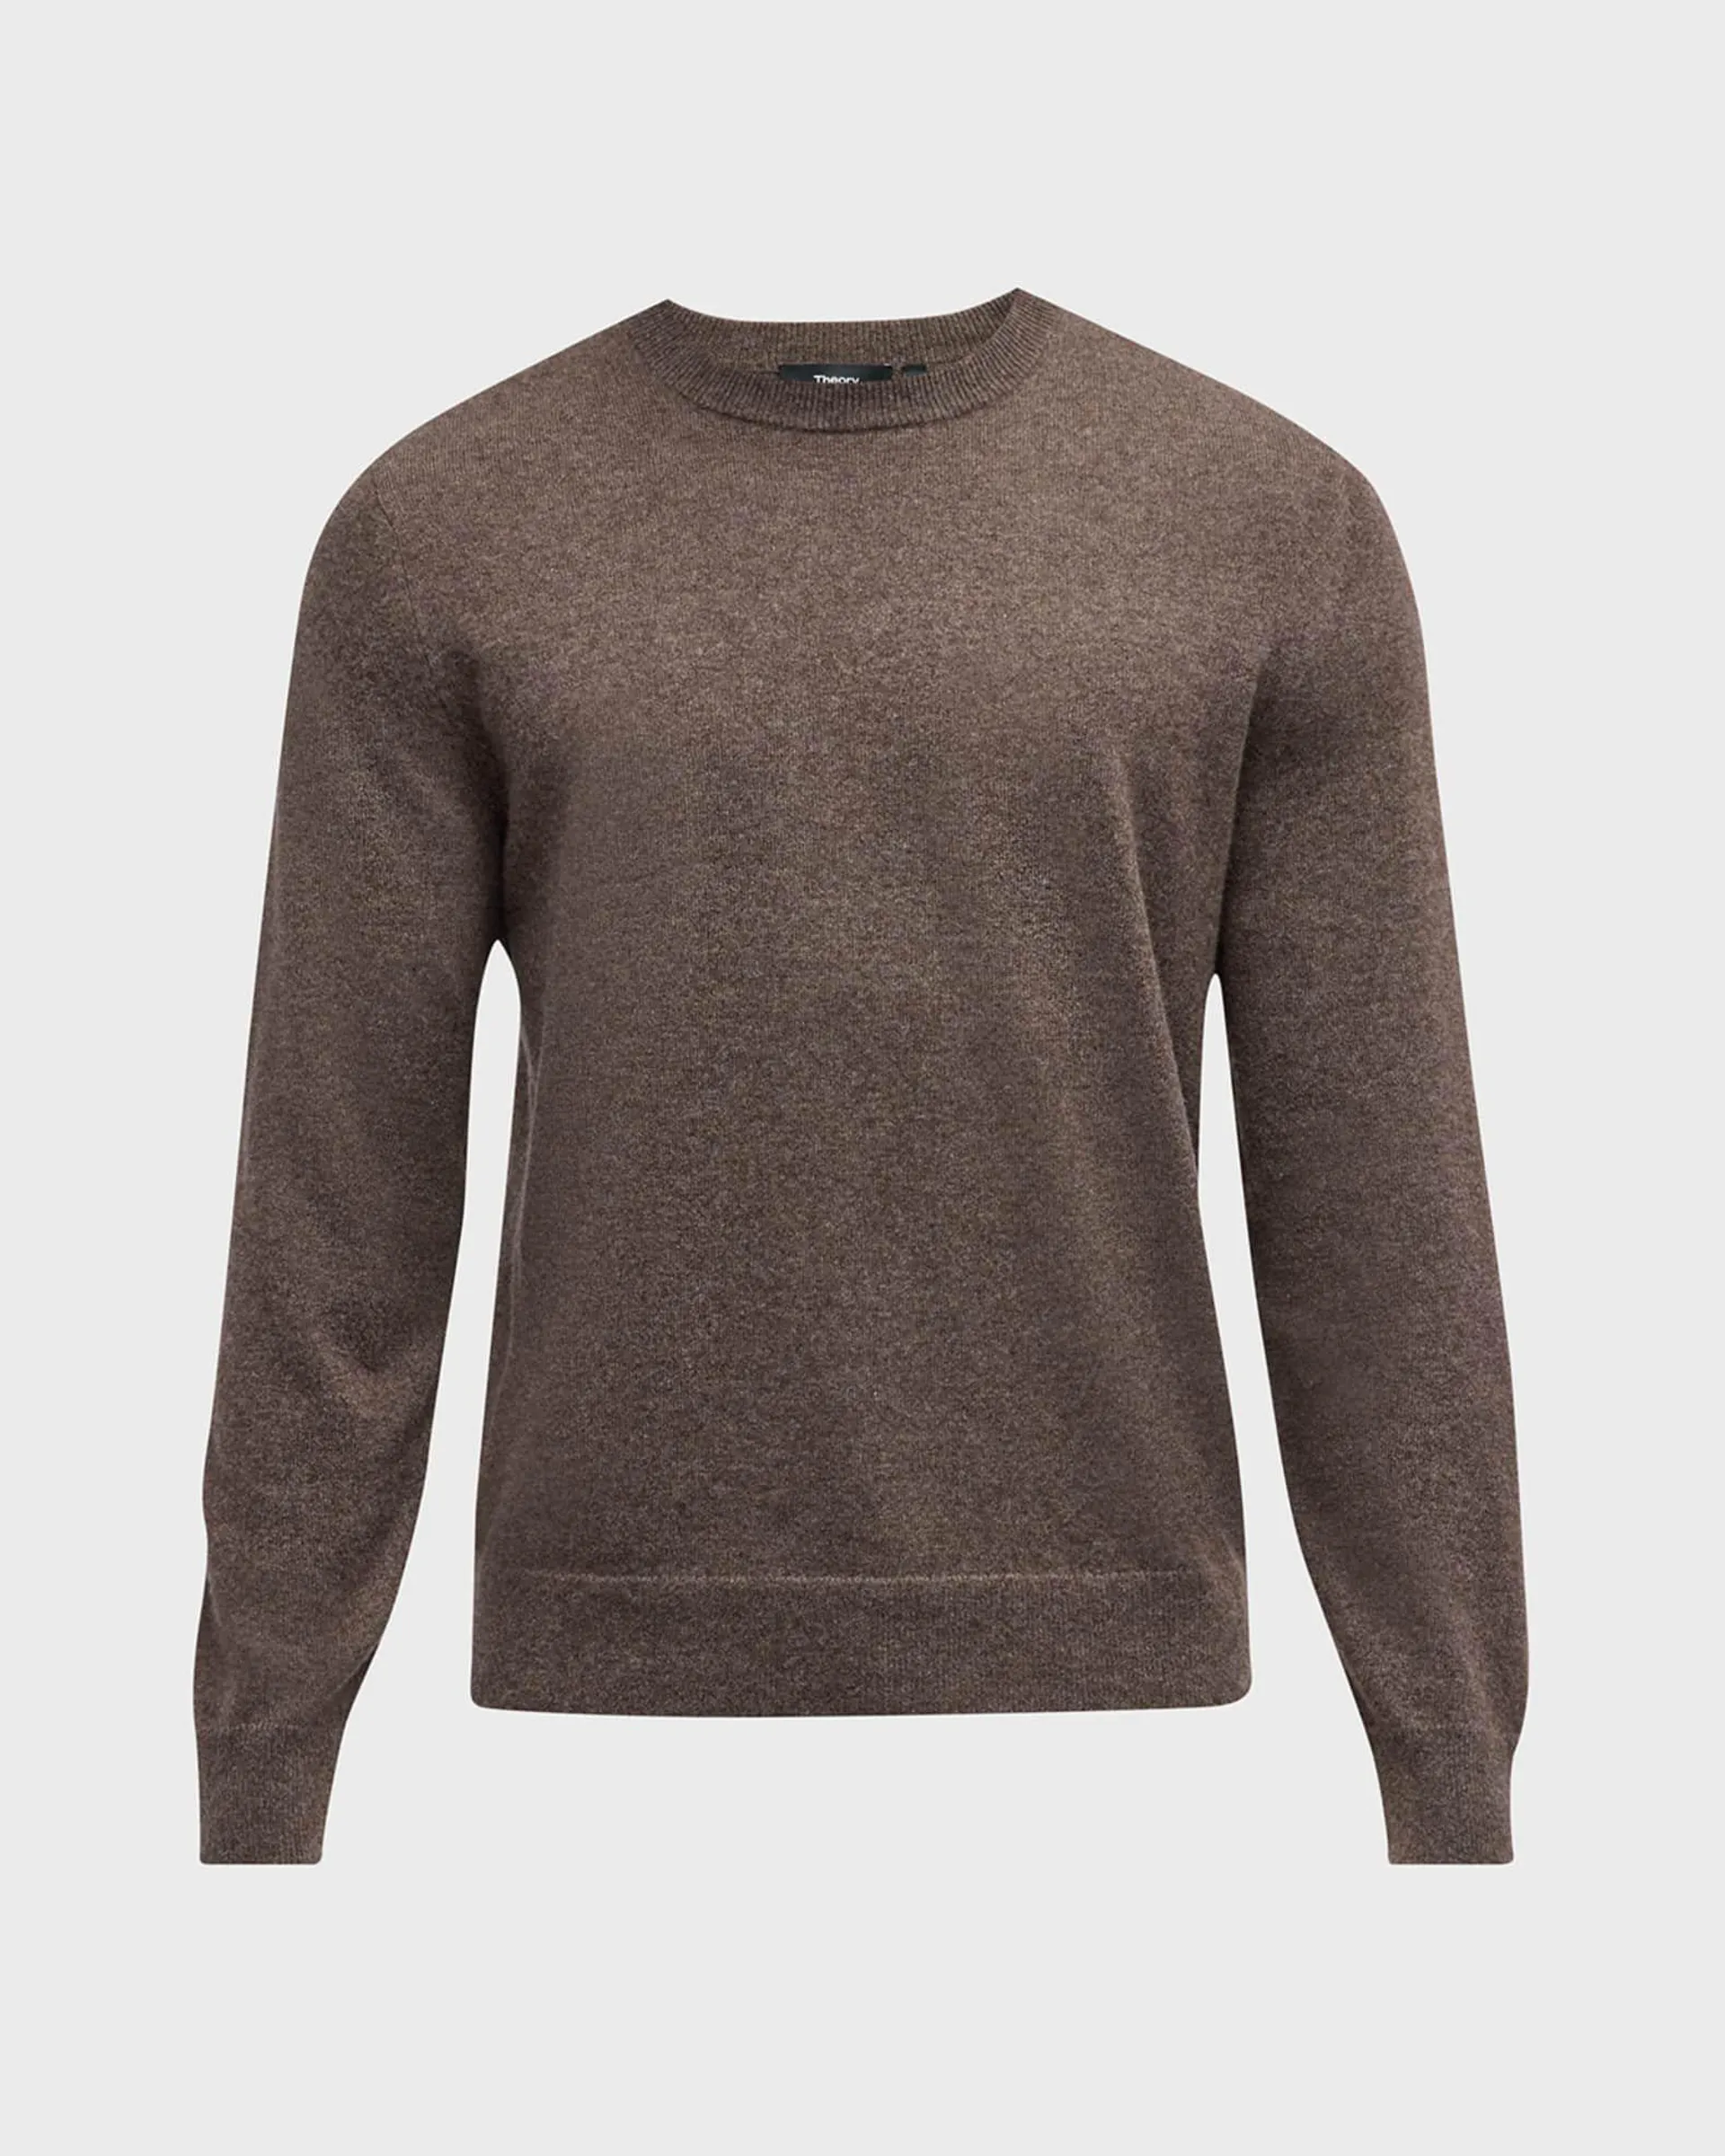 Men's Hilles Sweater in Cashmere